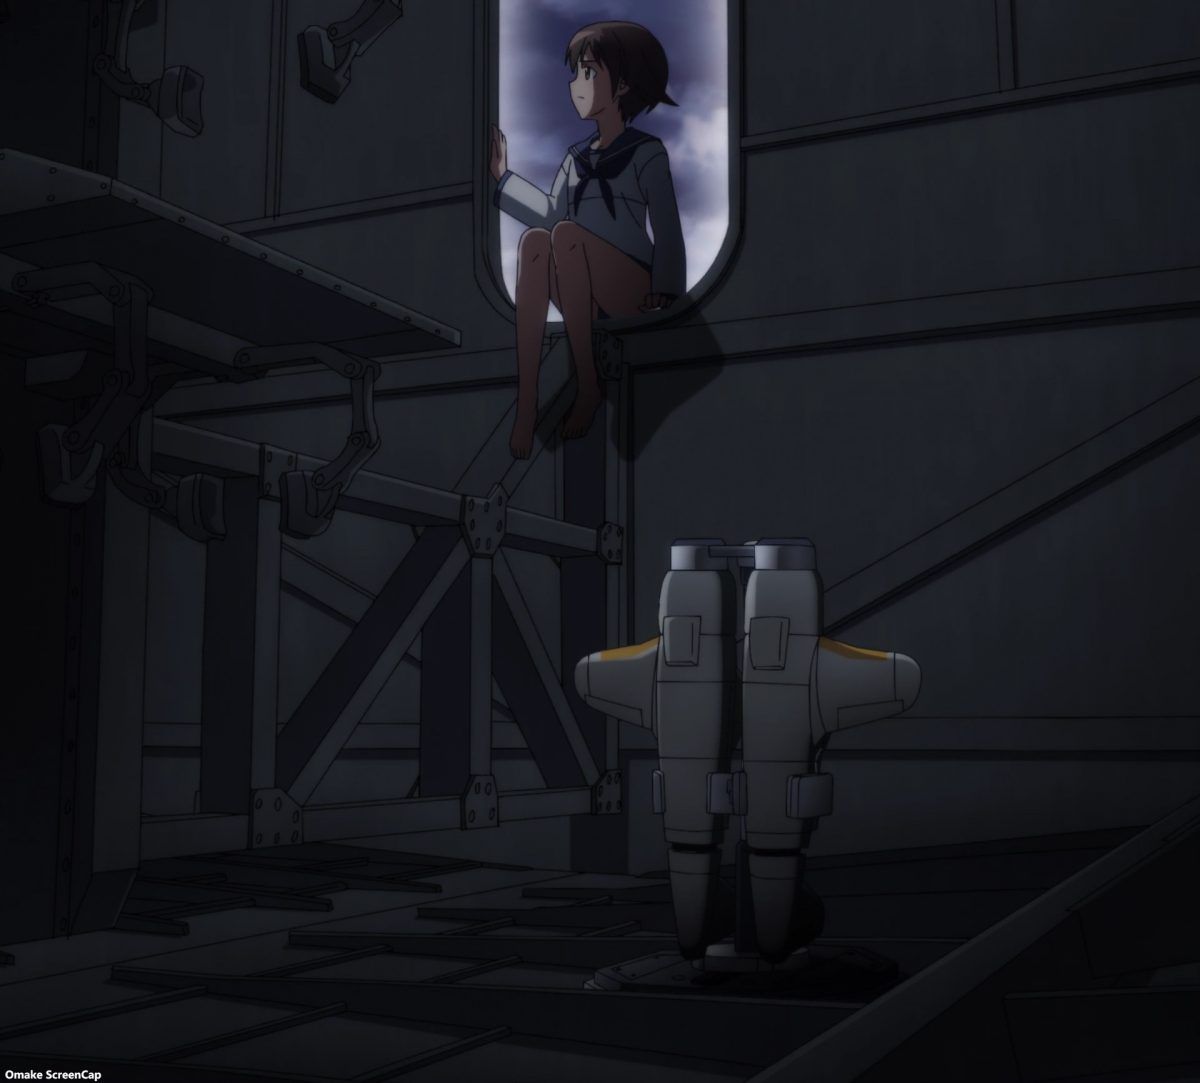 Strike Witches Road To Berlin Episode 10 Yoshika Watches From Window